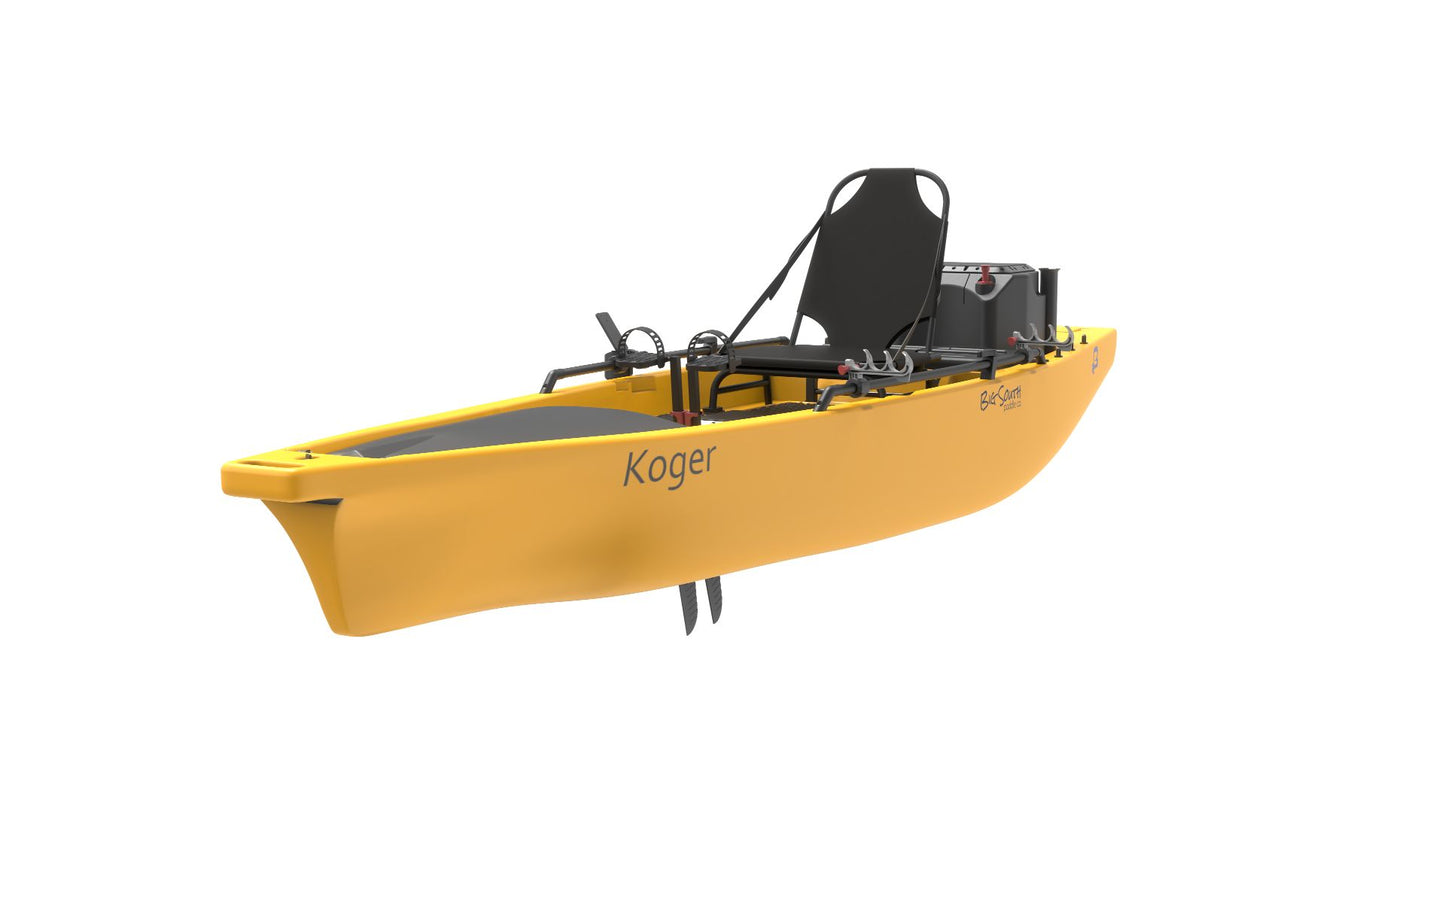 Koger 14 Foot Peddle Fishing Kayak with Live Well, 360 Degree Seat, and Accessories. Front bow view